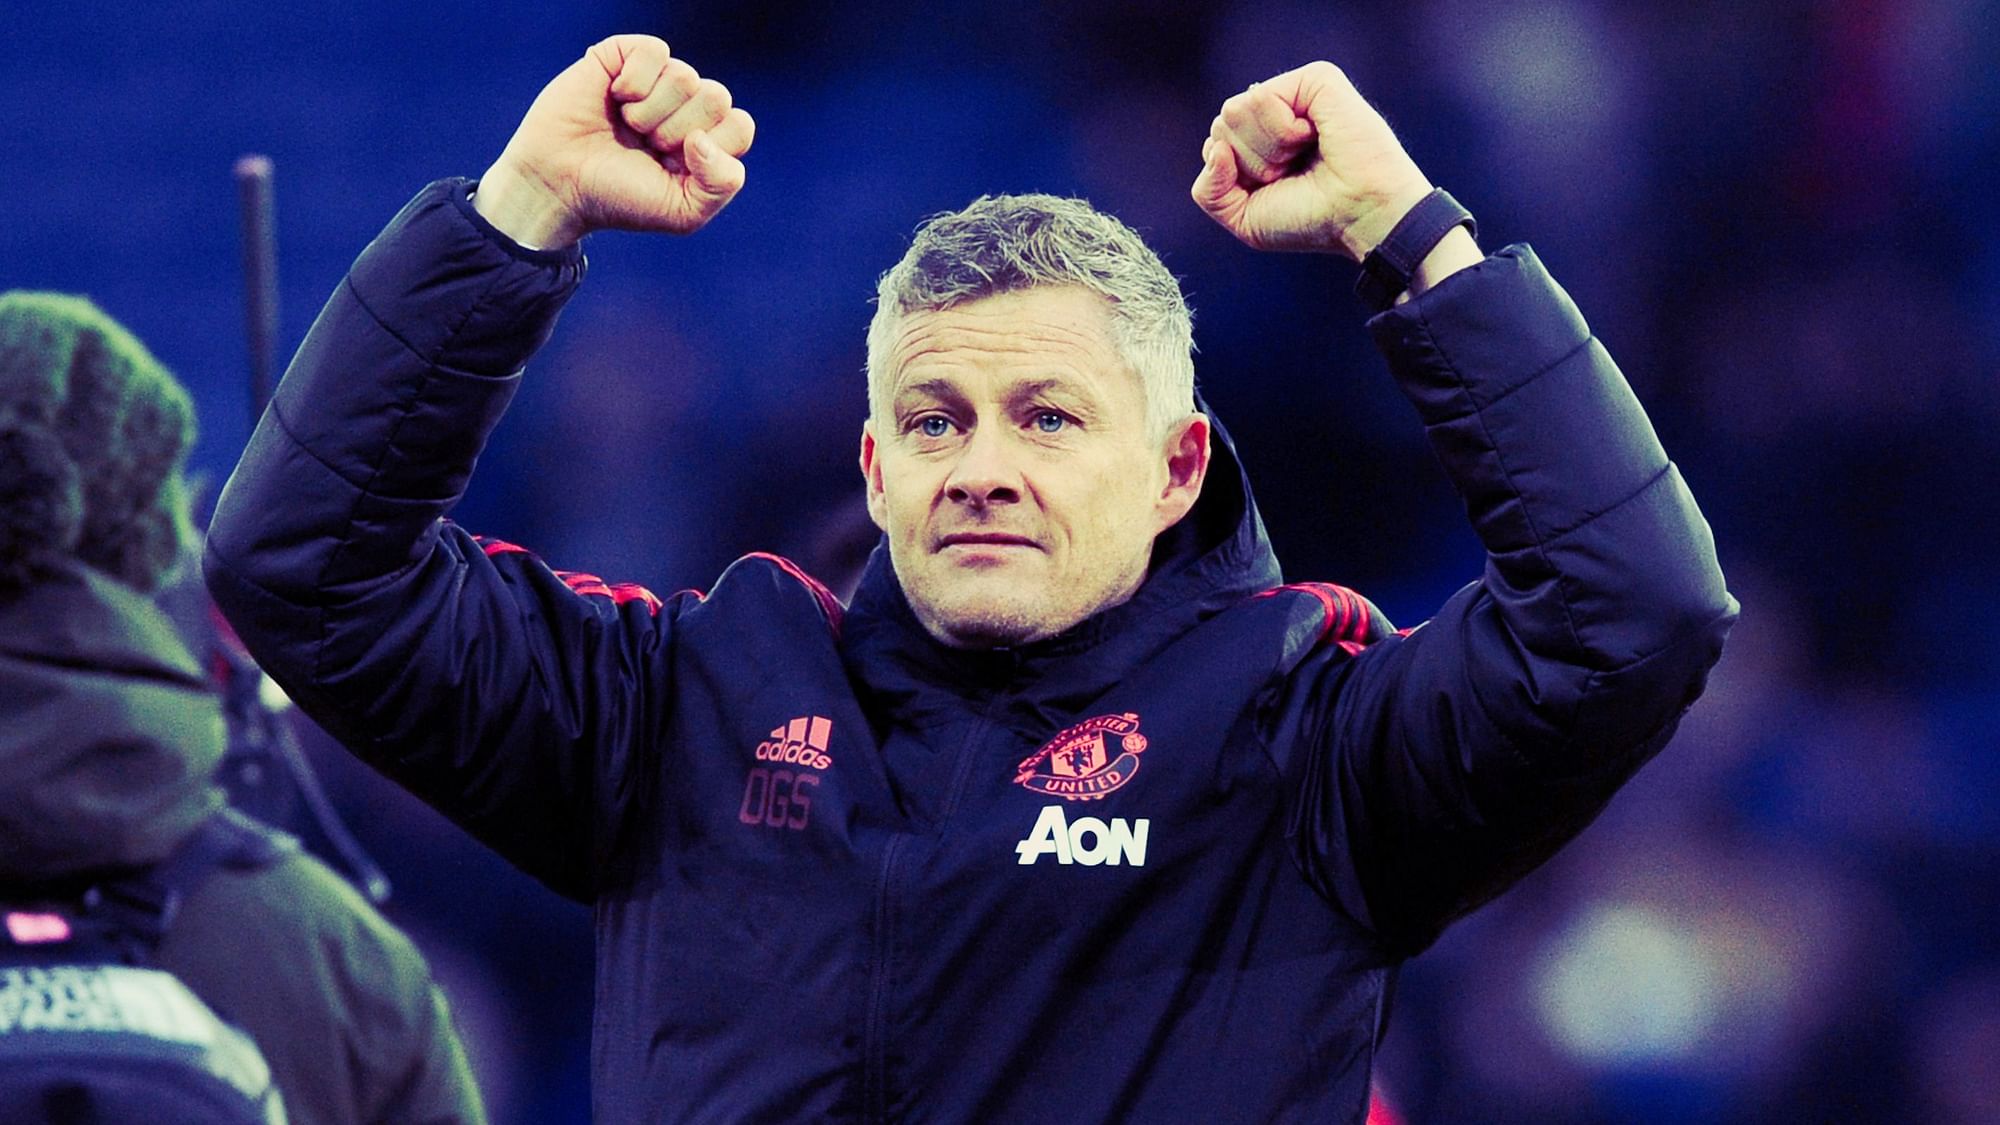 Manchester United have won 10 matches and drew once since Ole Gunnar Solskjaer replaced Mourinho.